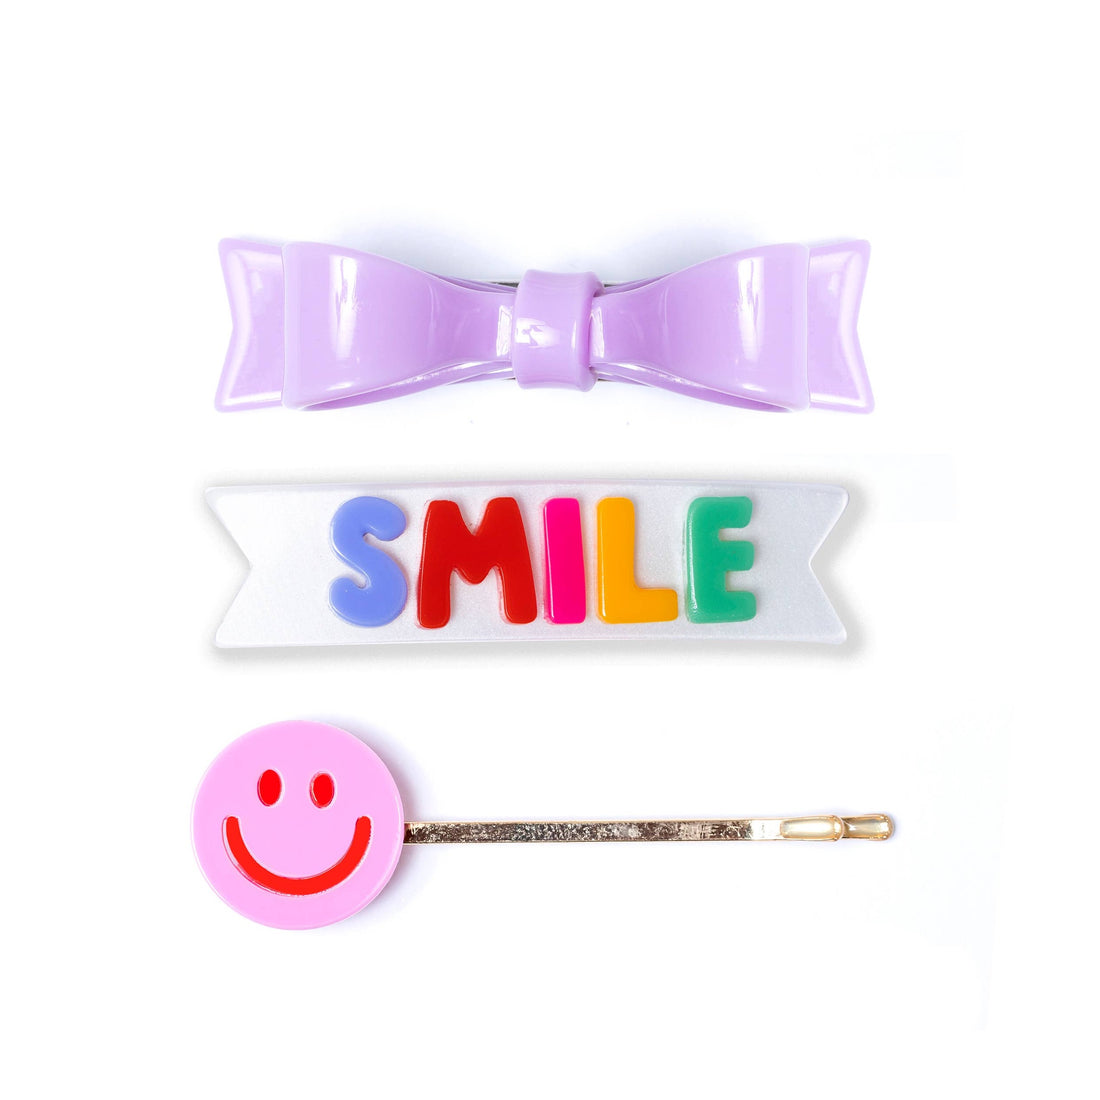 Hair Clips - Smile - Set of 3